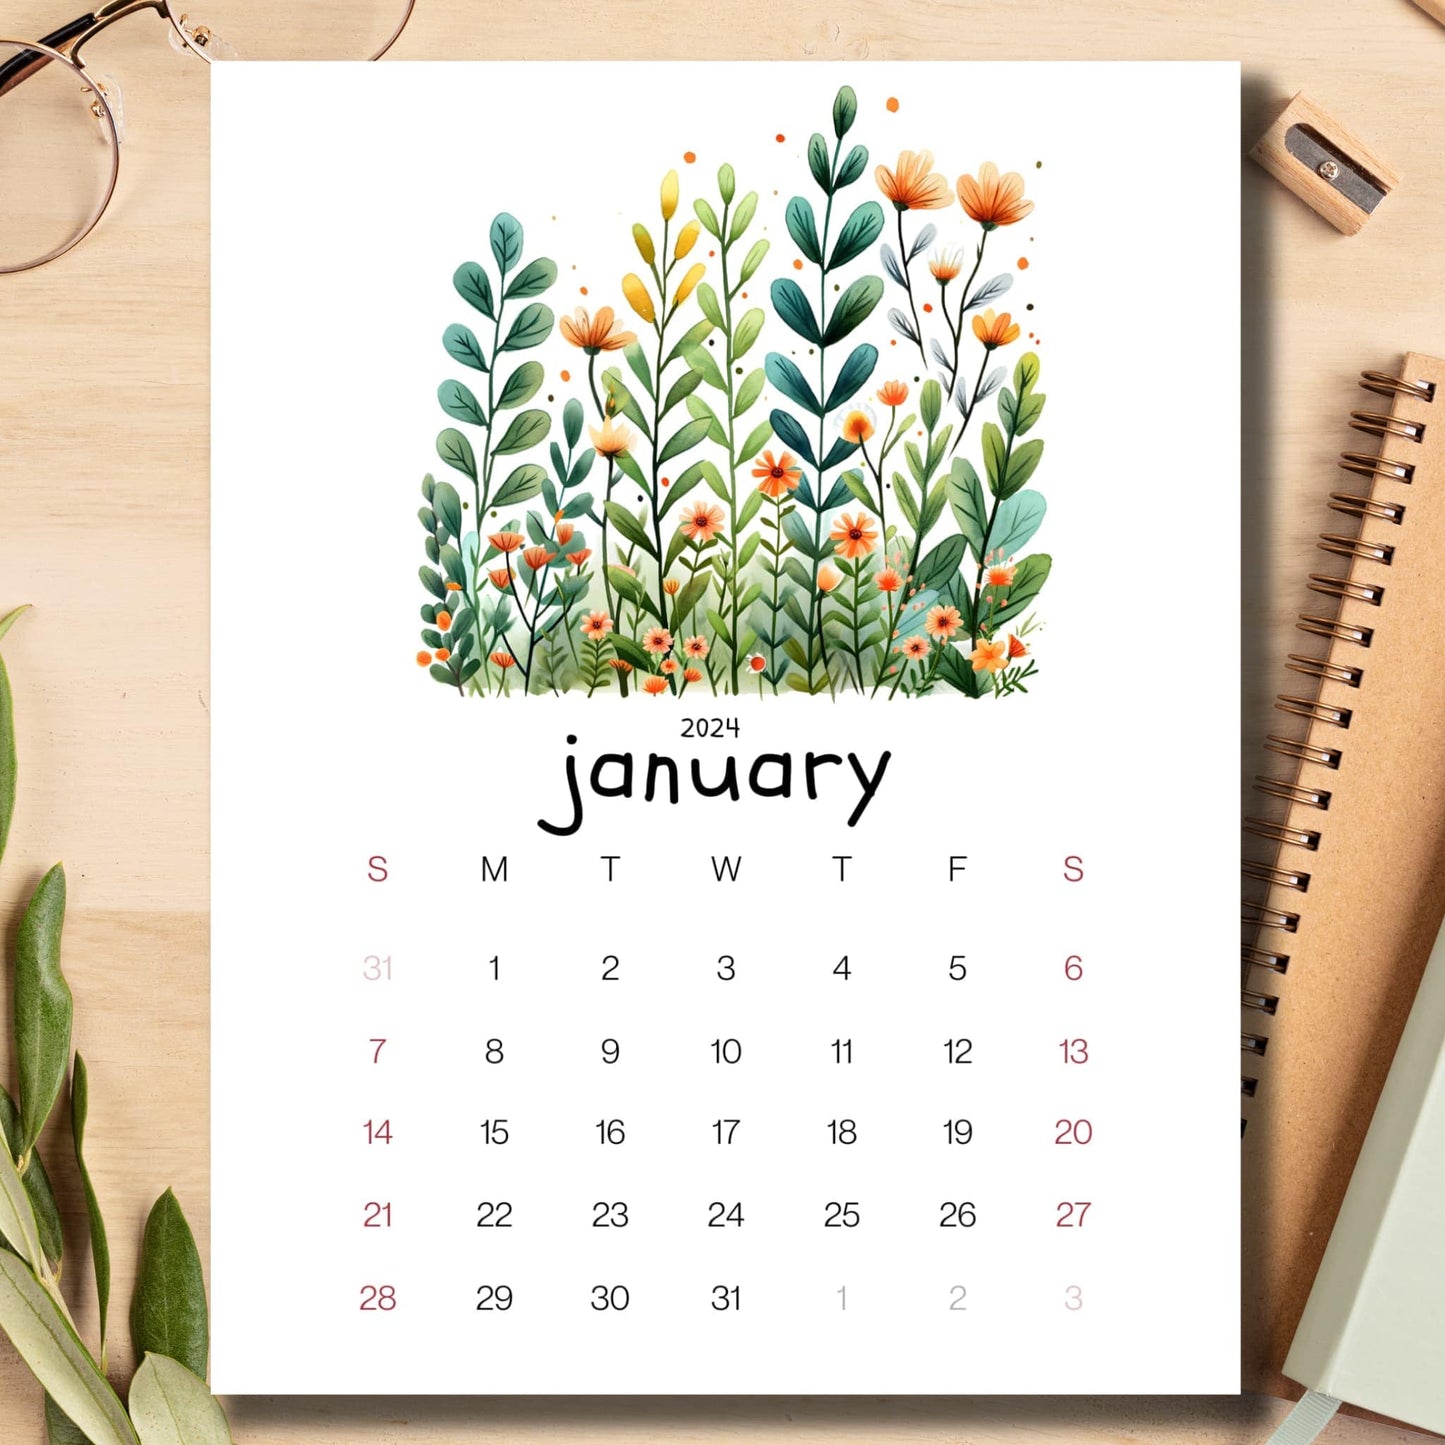 Evergreen Embrace January 2024 calendar displayed on a light brown wooden desk with school supplies like notebooks, pencils, and sharpeners.